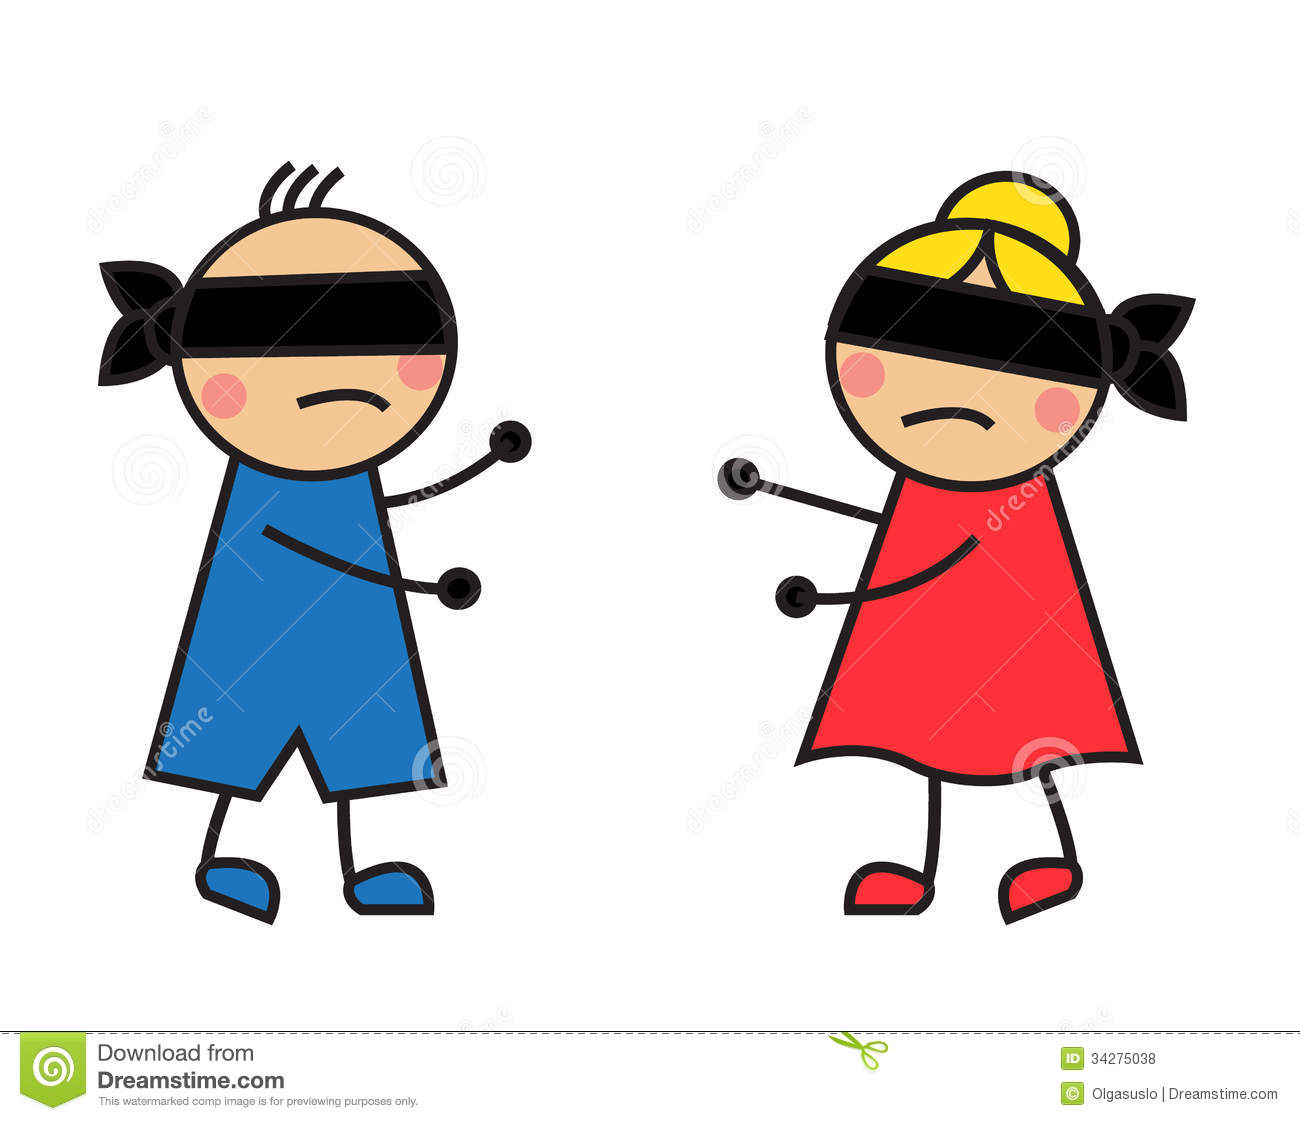 Children Blindfolded Seek Each Other Royalty Free Stock Photos   Image